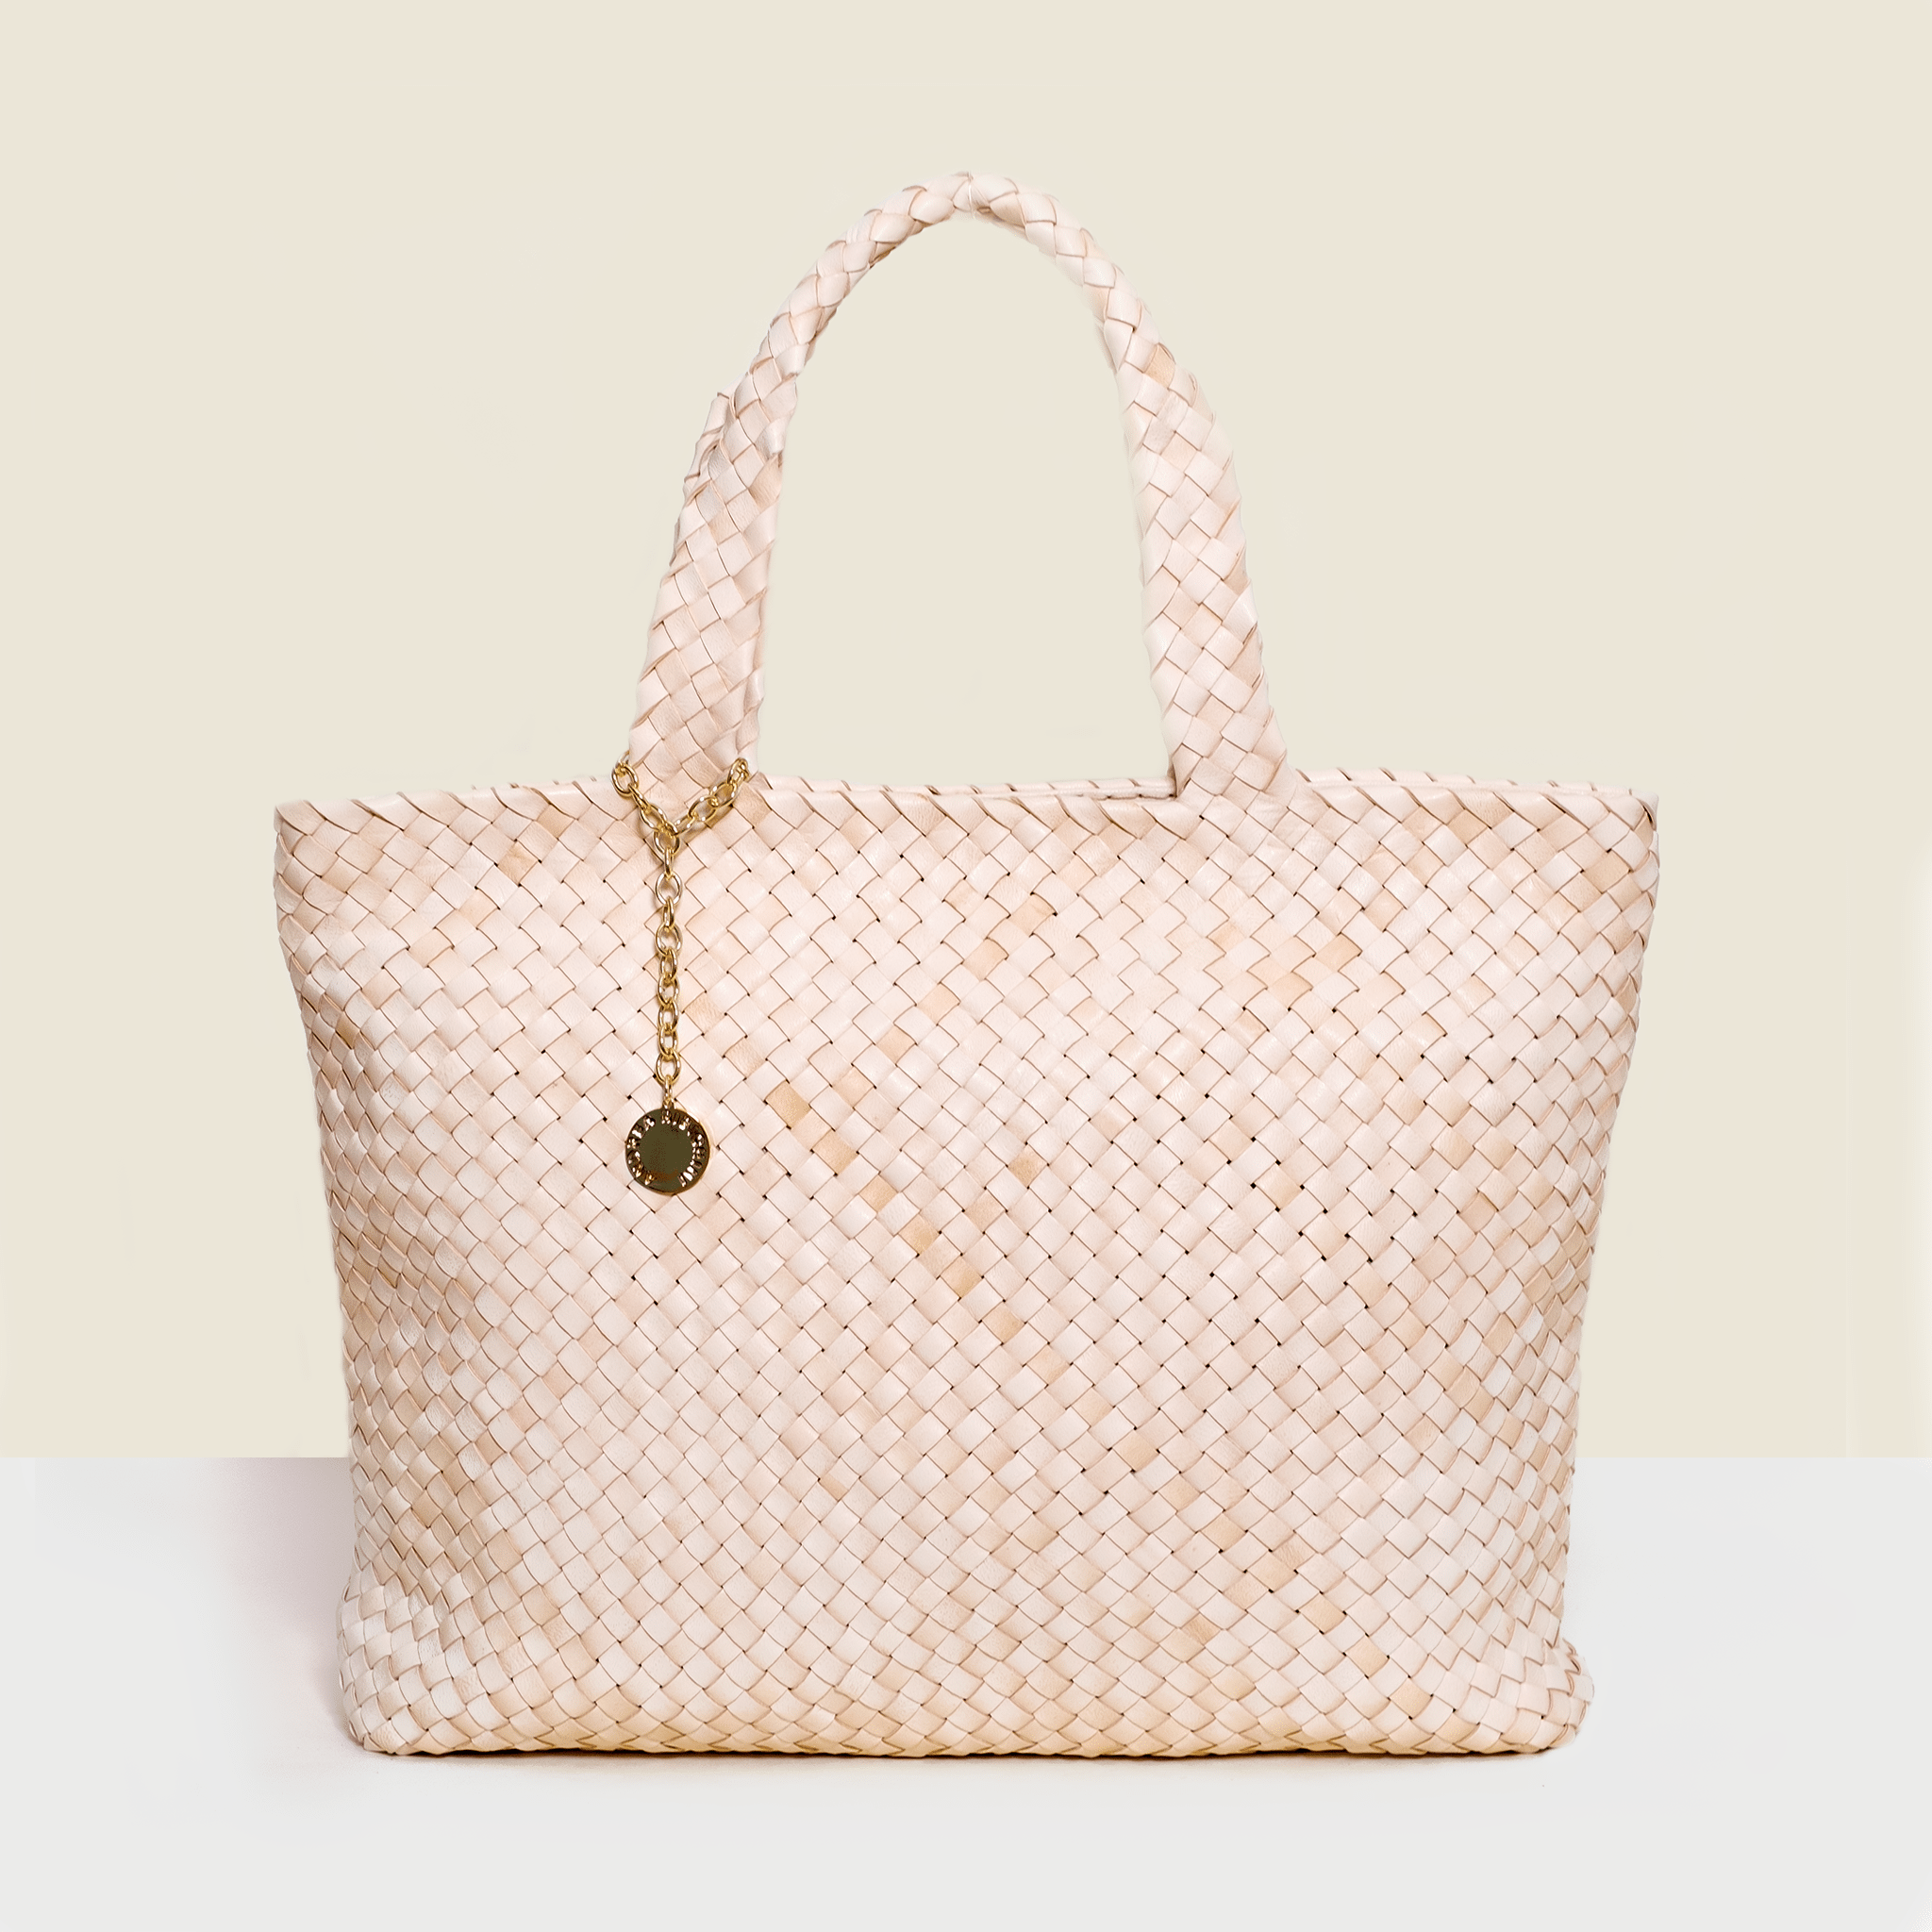 Woven Leather Bag, Made in Florence Italy